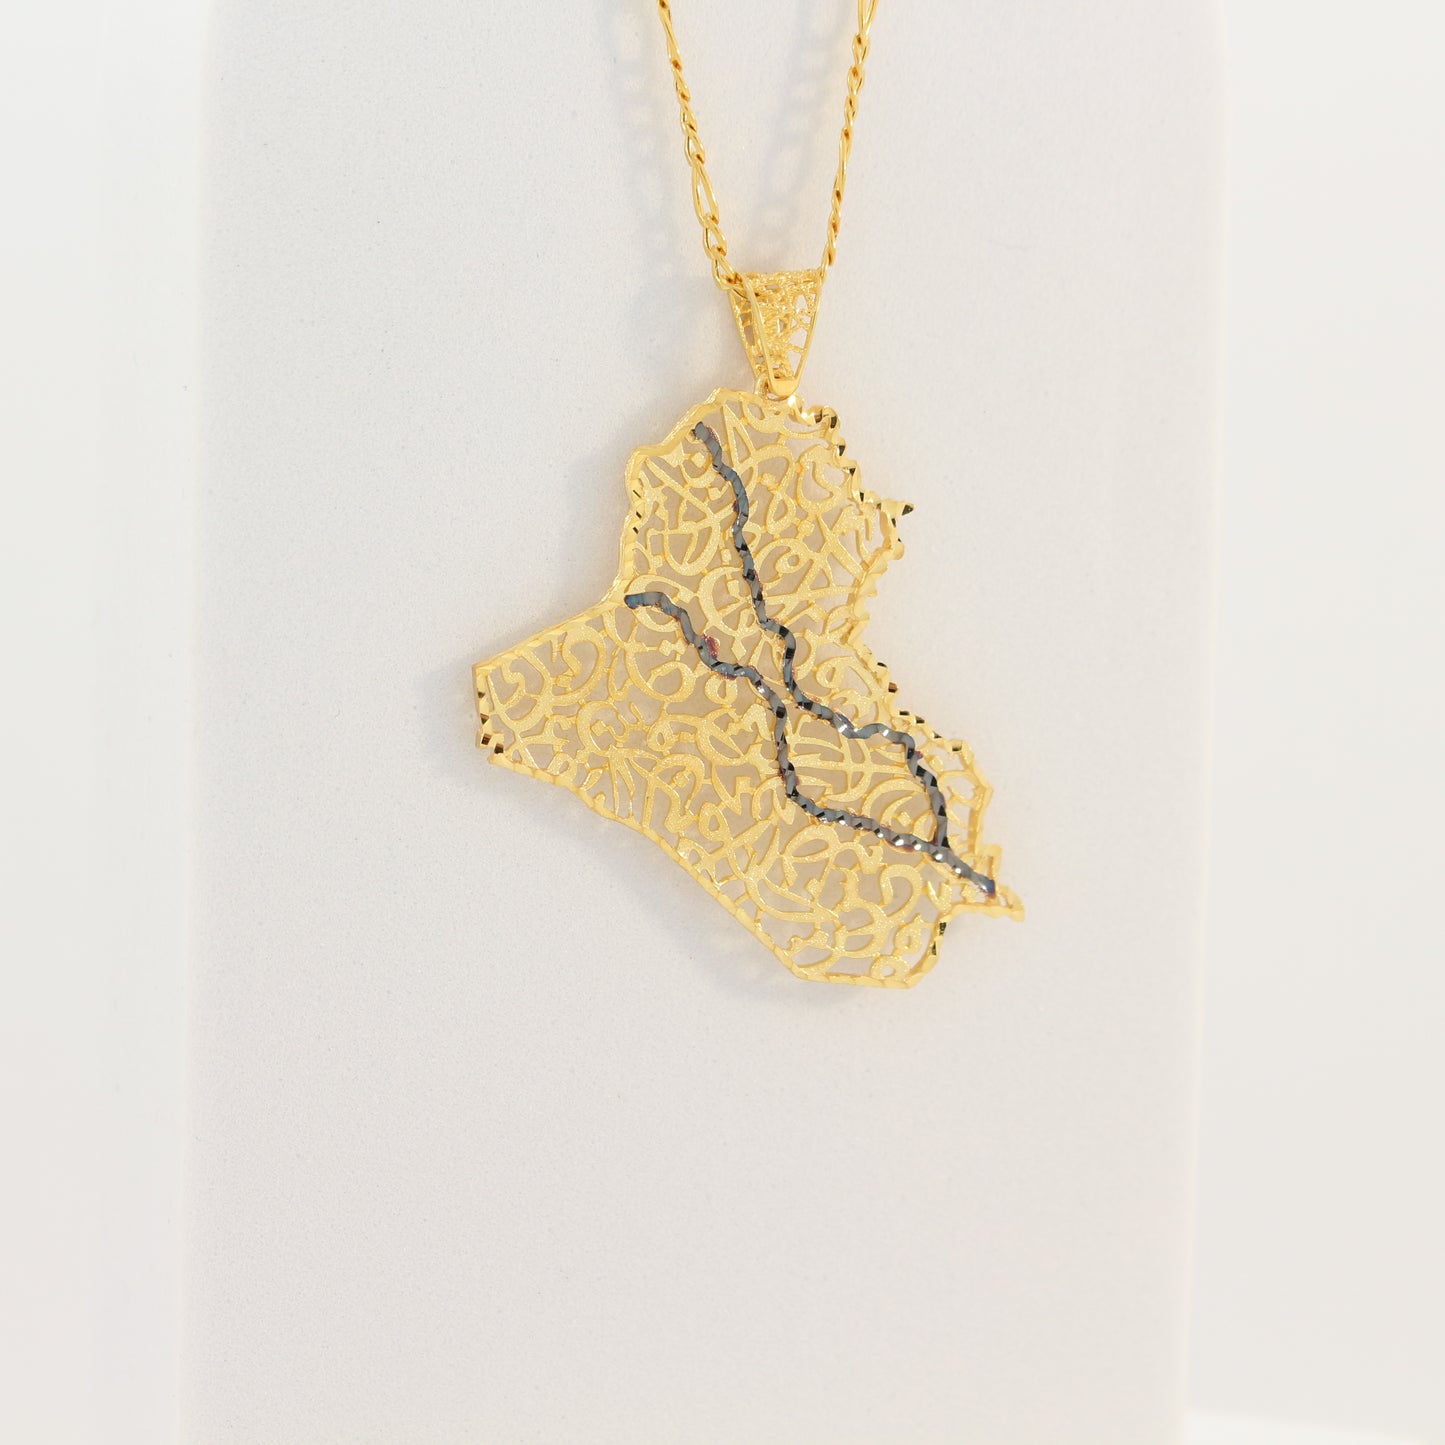 21K Gold Iraq Map Necklace